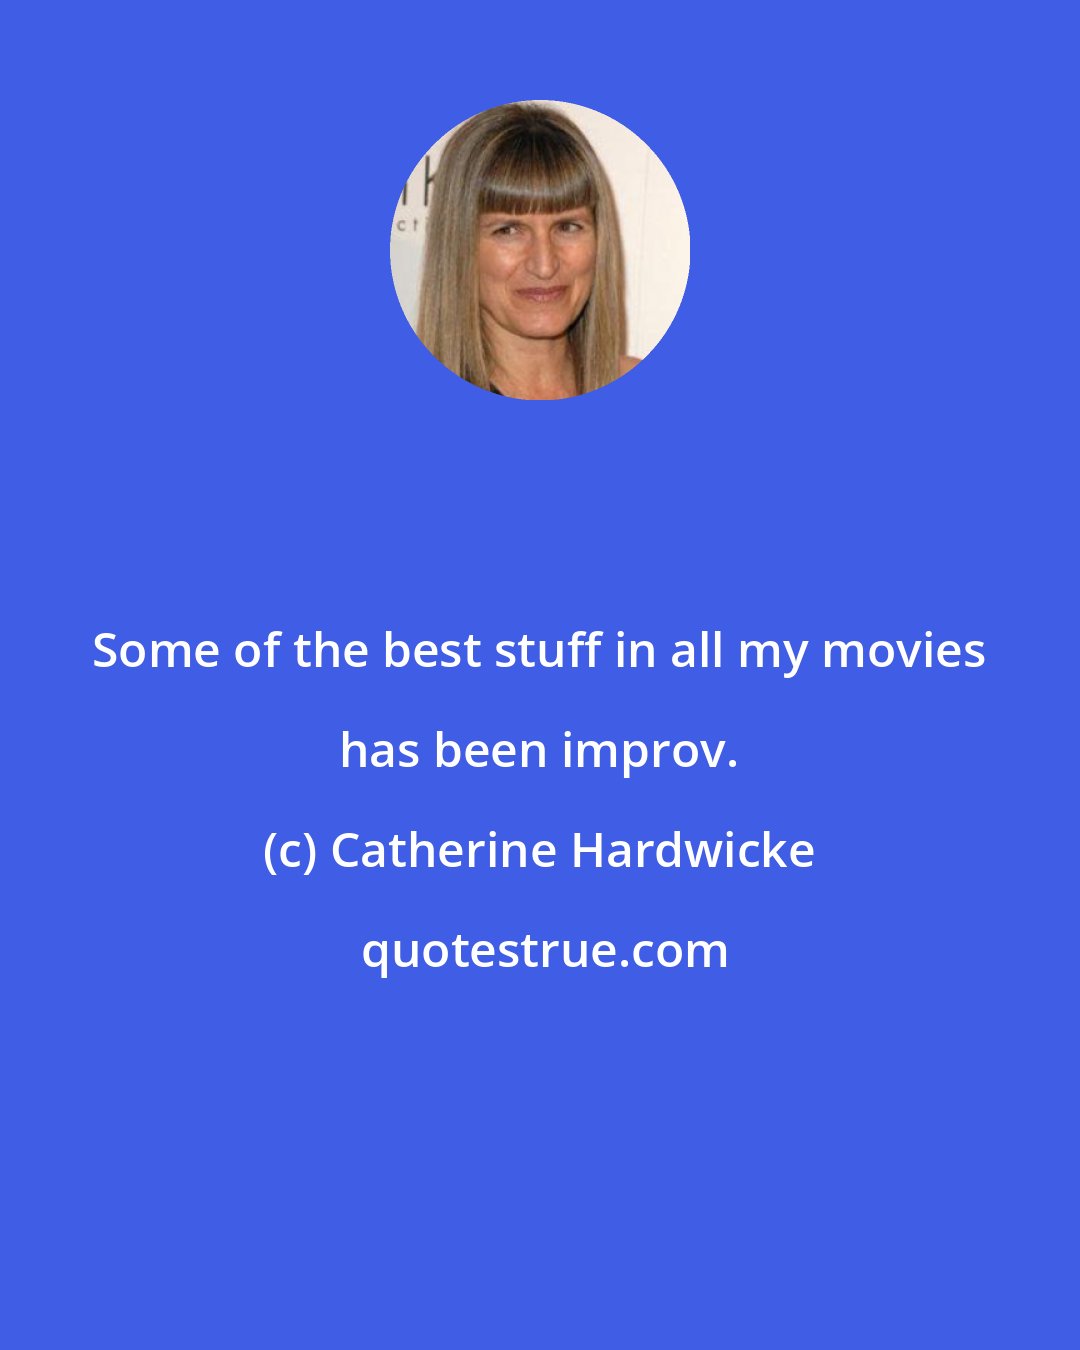 Catherine Hardwicke: Some of the best stuff in all my movies has been improv.